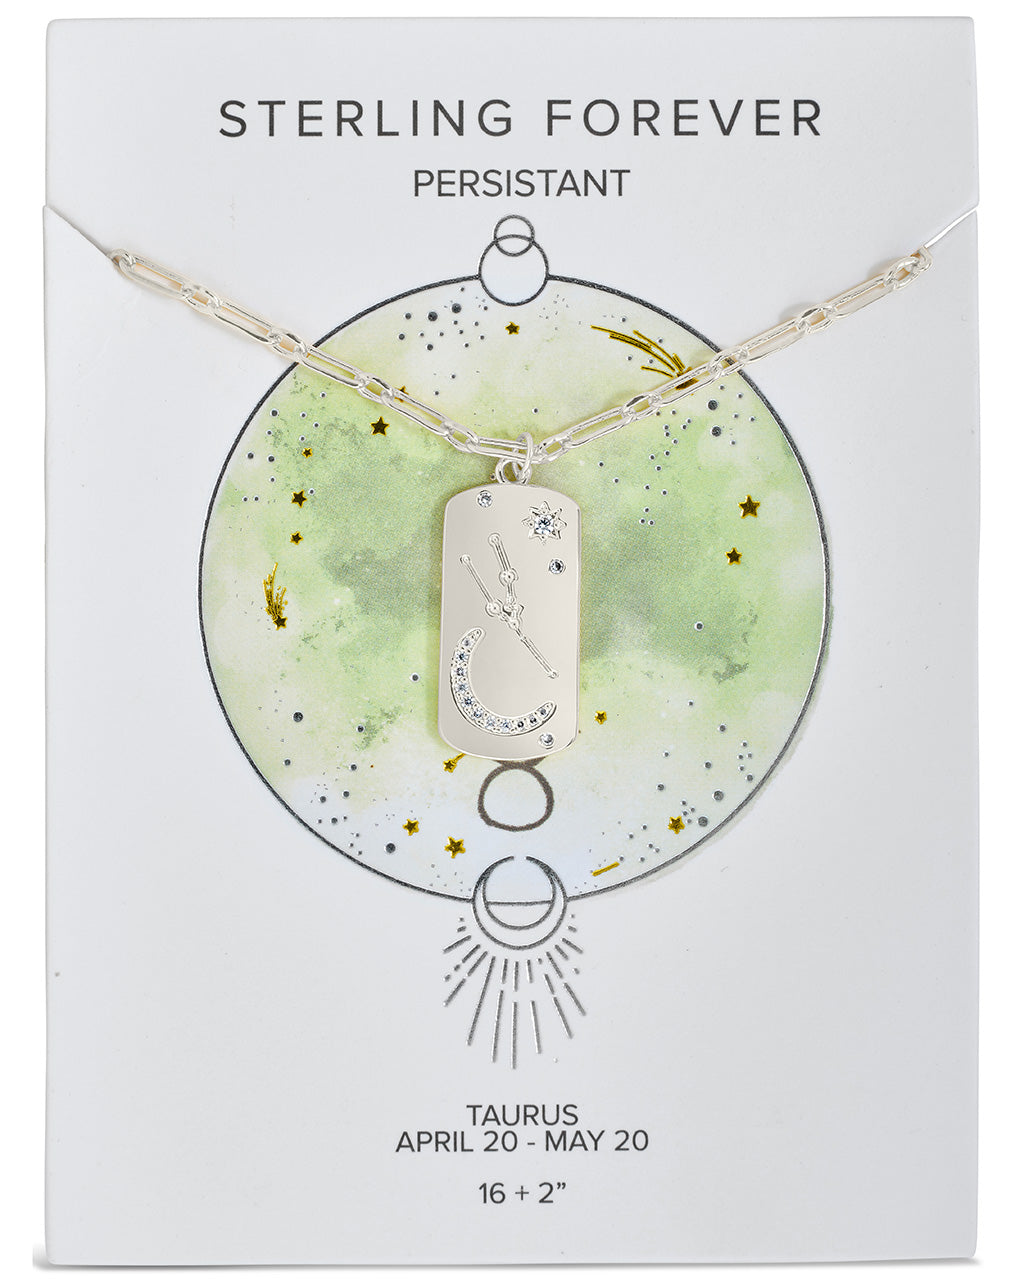 Constellation Dog Tag Necklace Necklace Sterling Forever Silver Taurus (Apr 20 - May 20) 